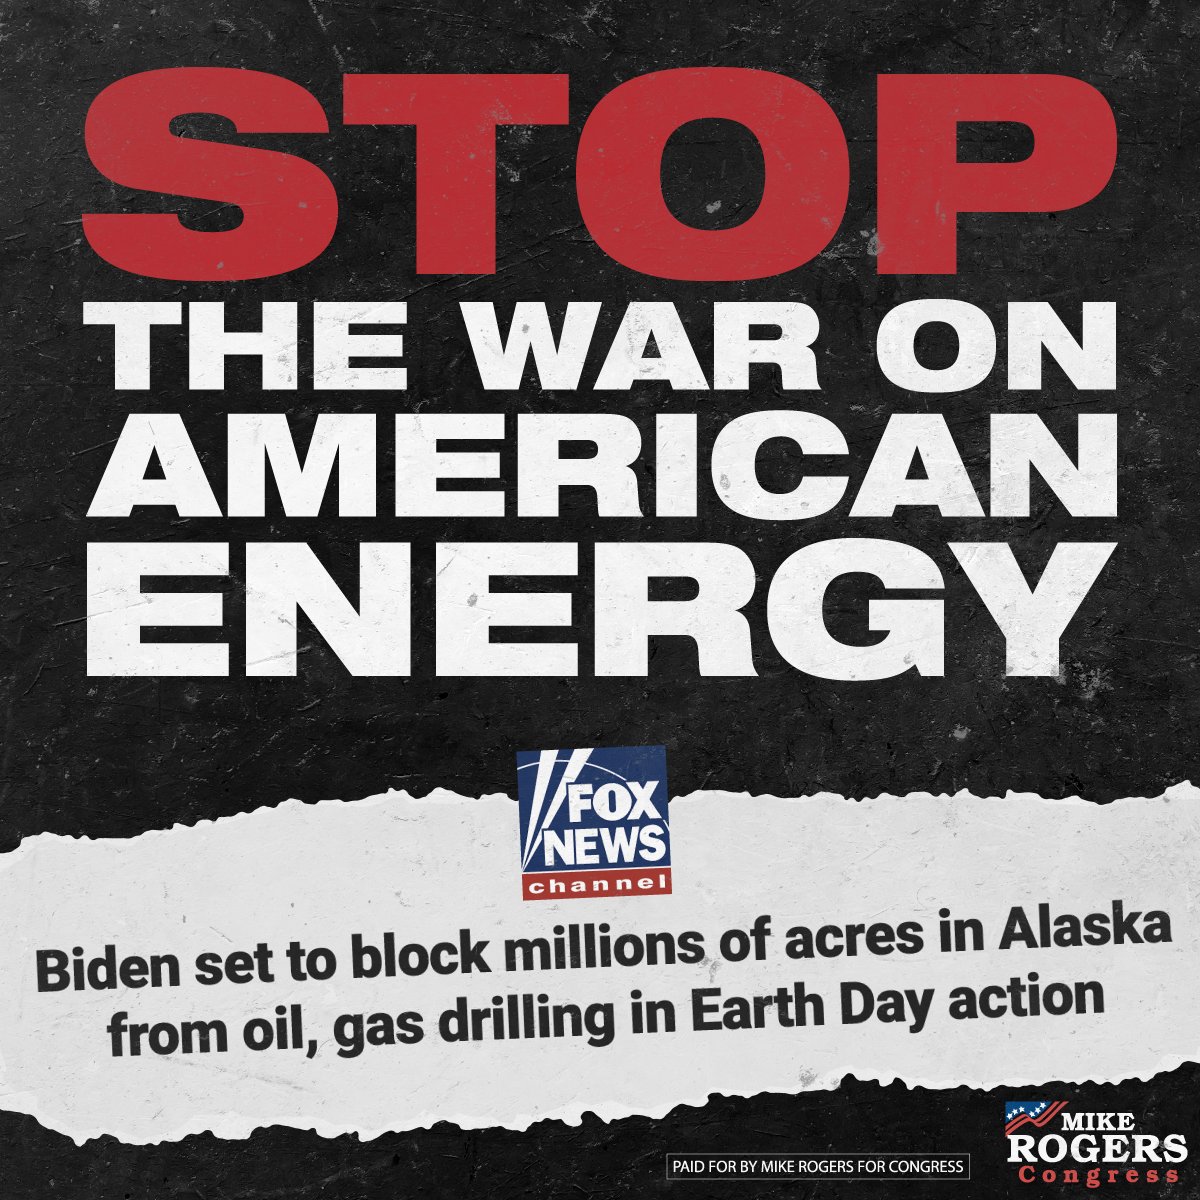 The Biden administration proves AGAIN that their focus is on their woke climate agenda and not on easing the cost of energy for ALL Americans. Radicals like Crooked Joe will never, ever put America FIRST.